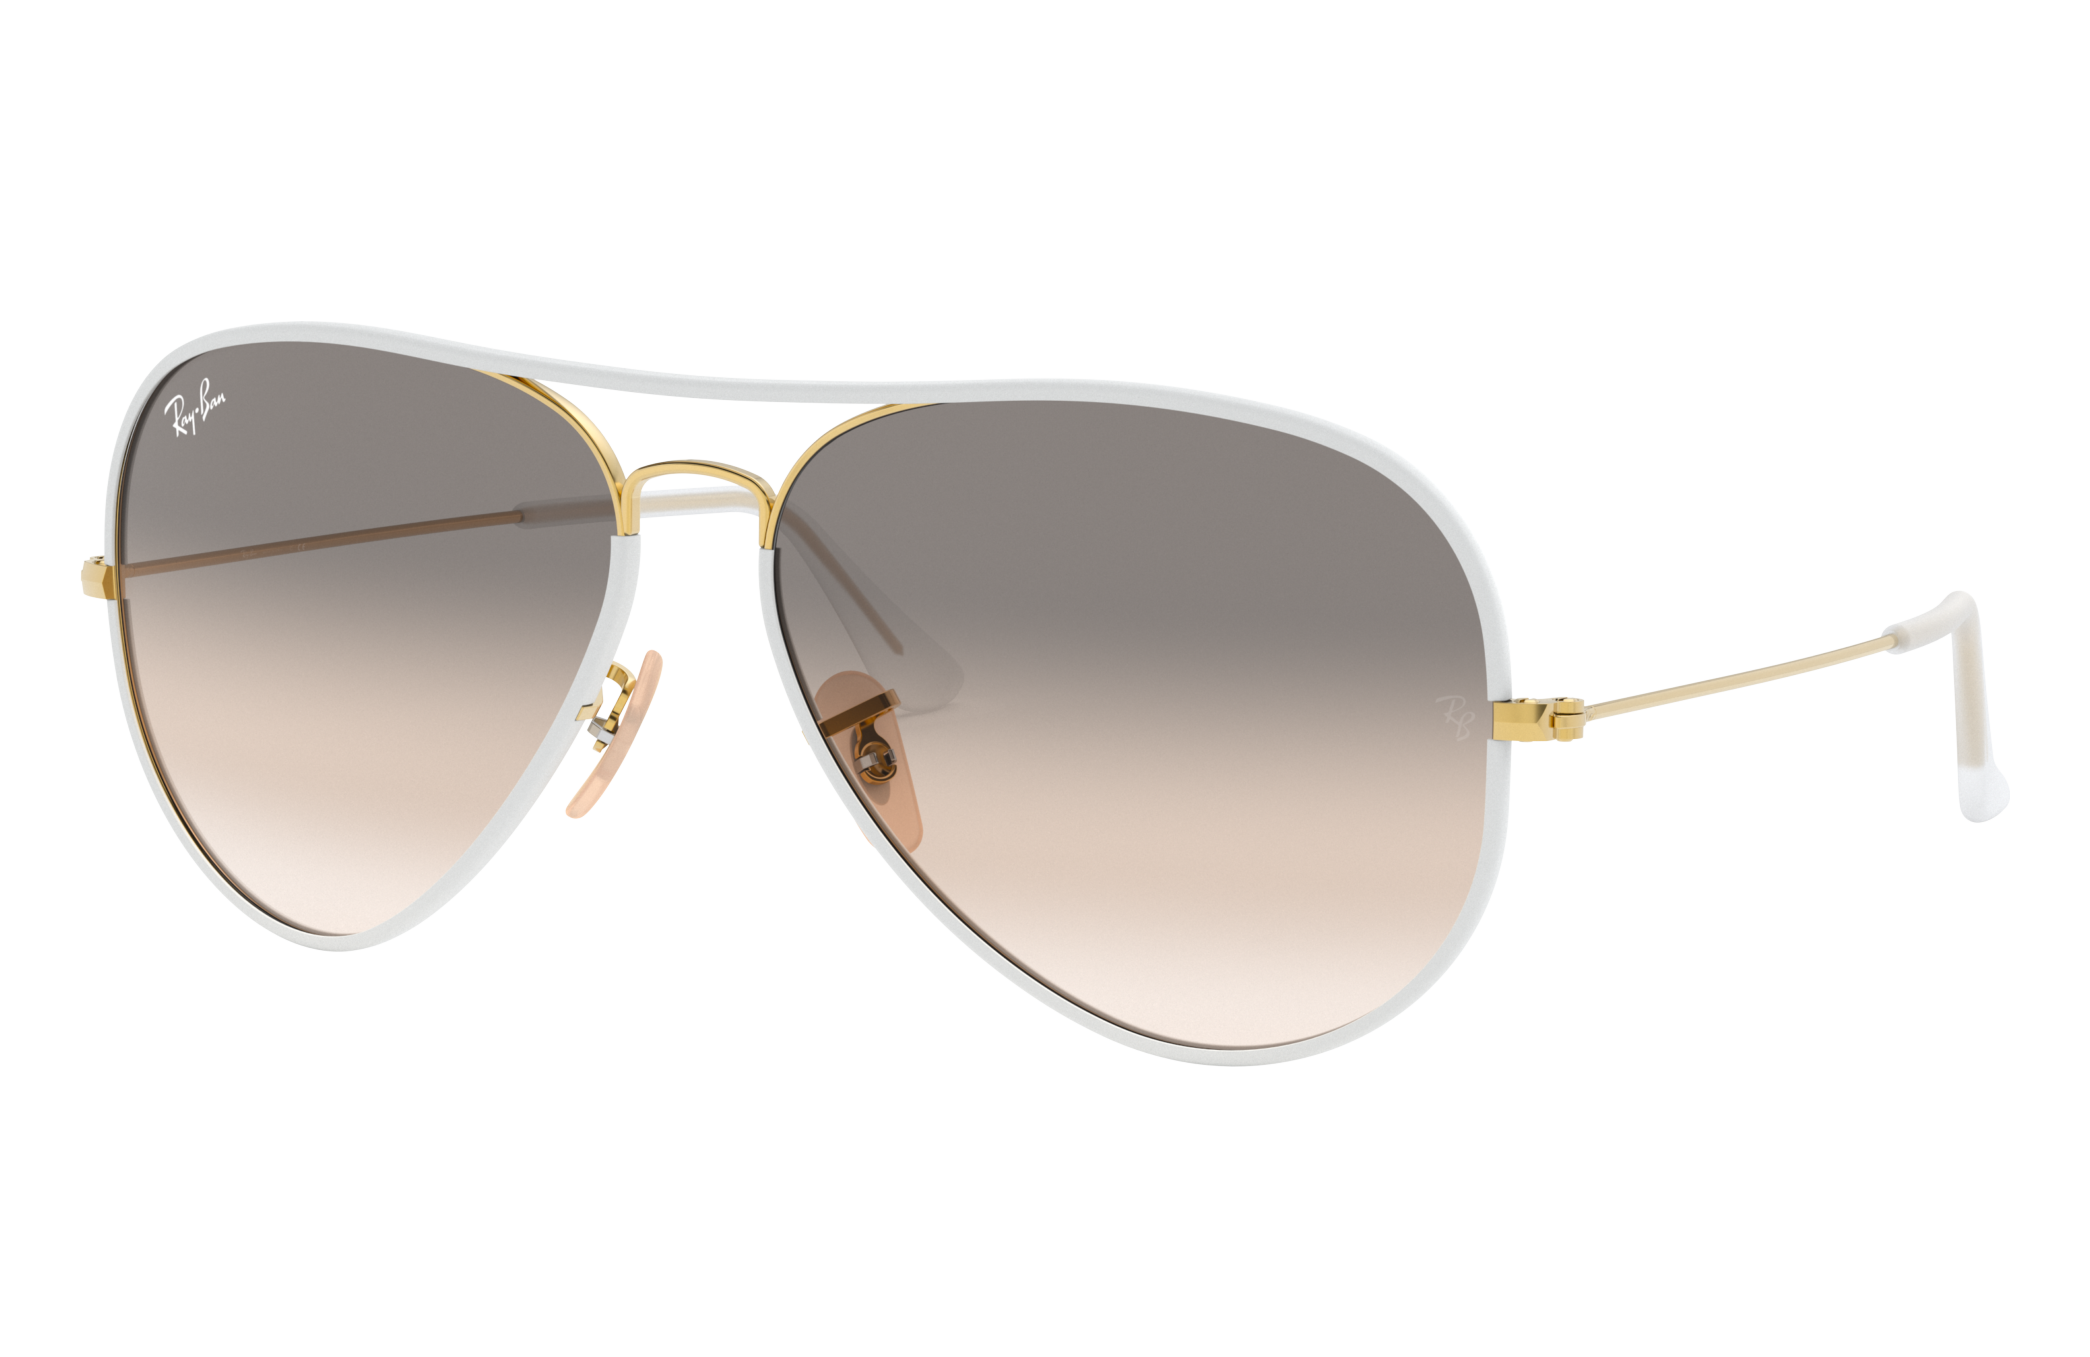 Arriba 94+ imagen ray ban sunglasses with white frame